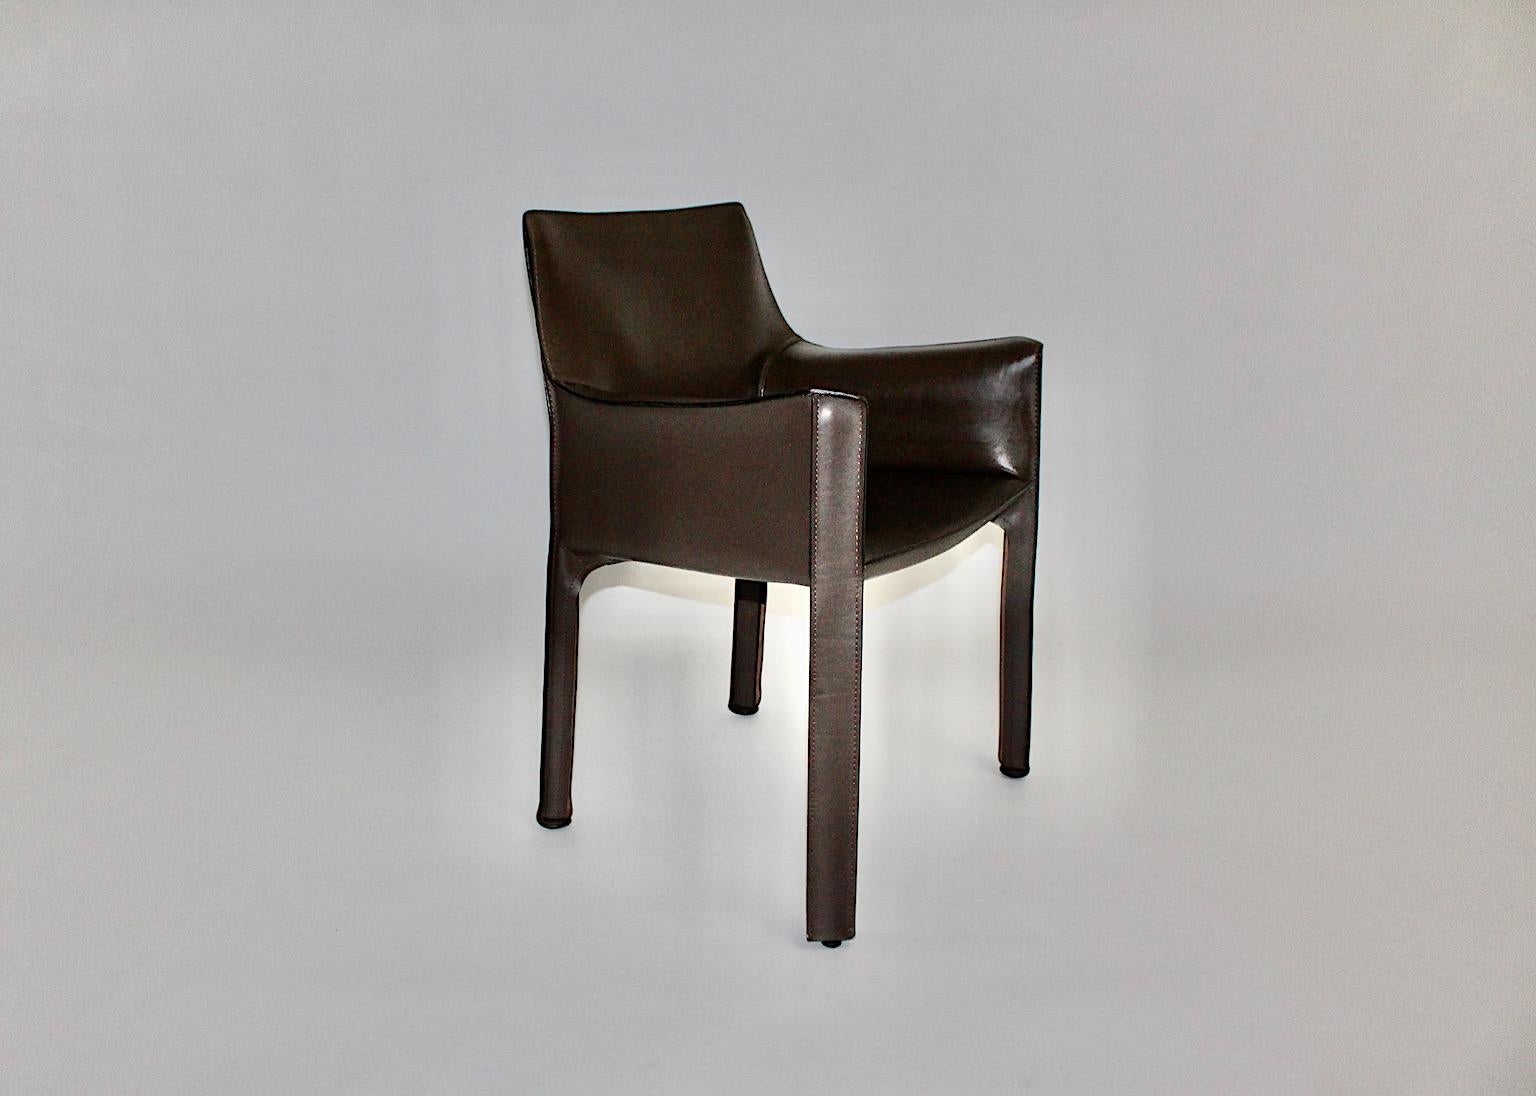 Mario Bellini Vintage Chocolate Brown Leather Dining Chairs Cassina 1970s Italy For Sale 1